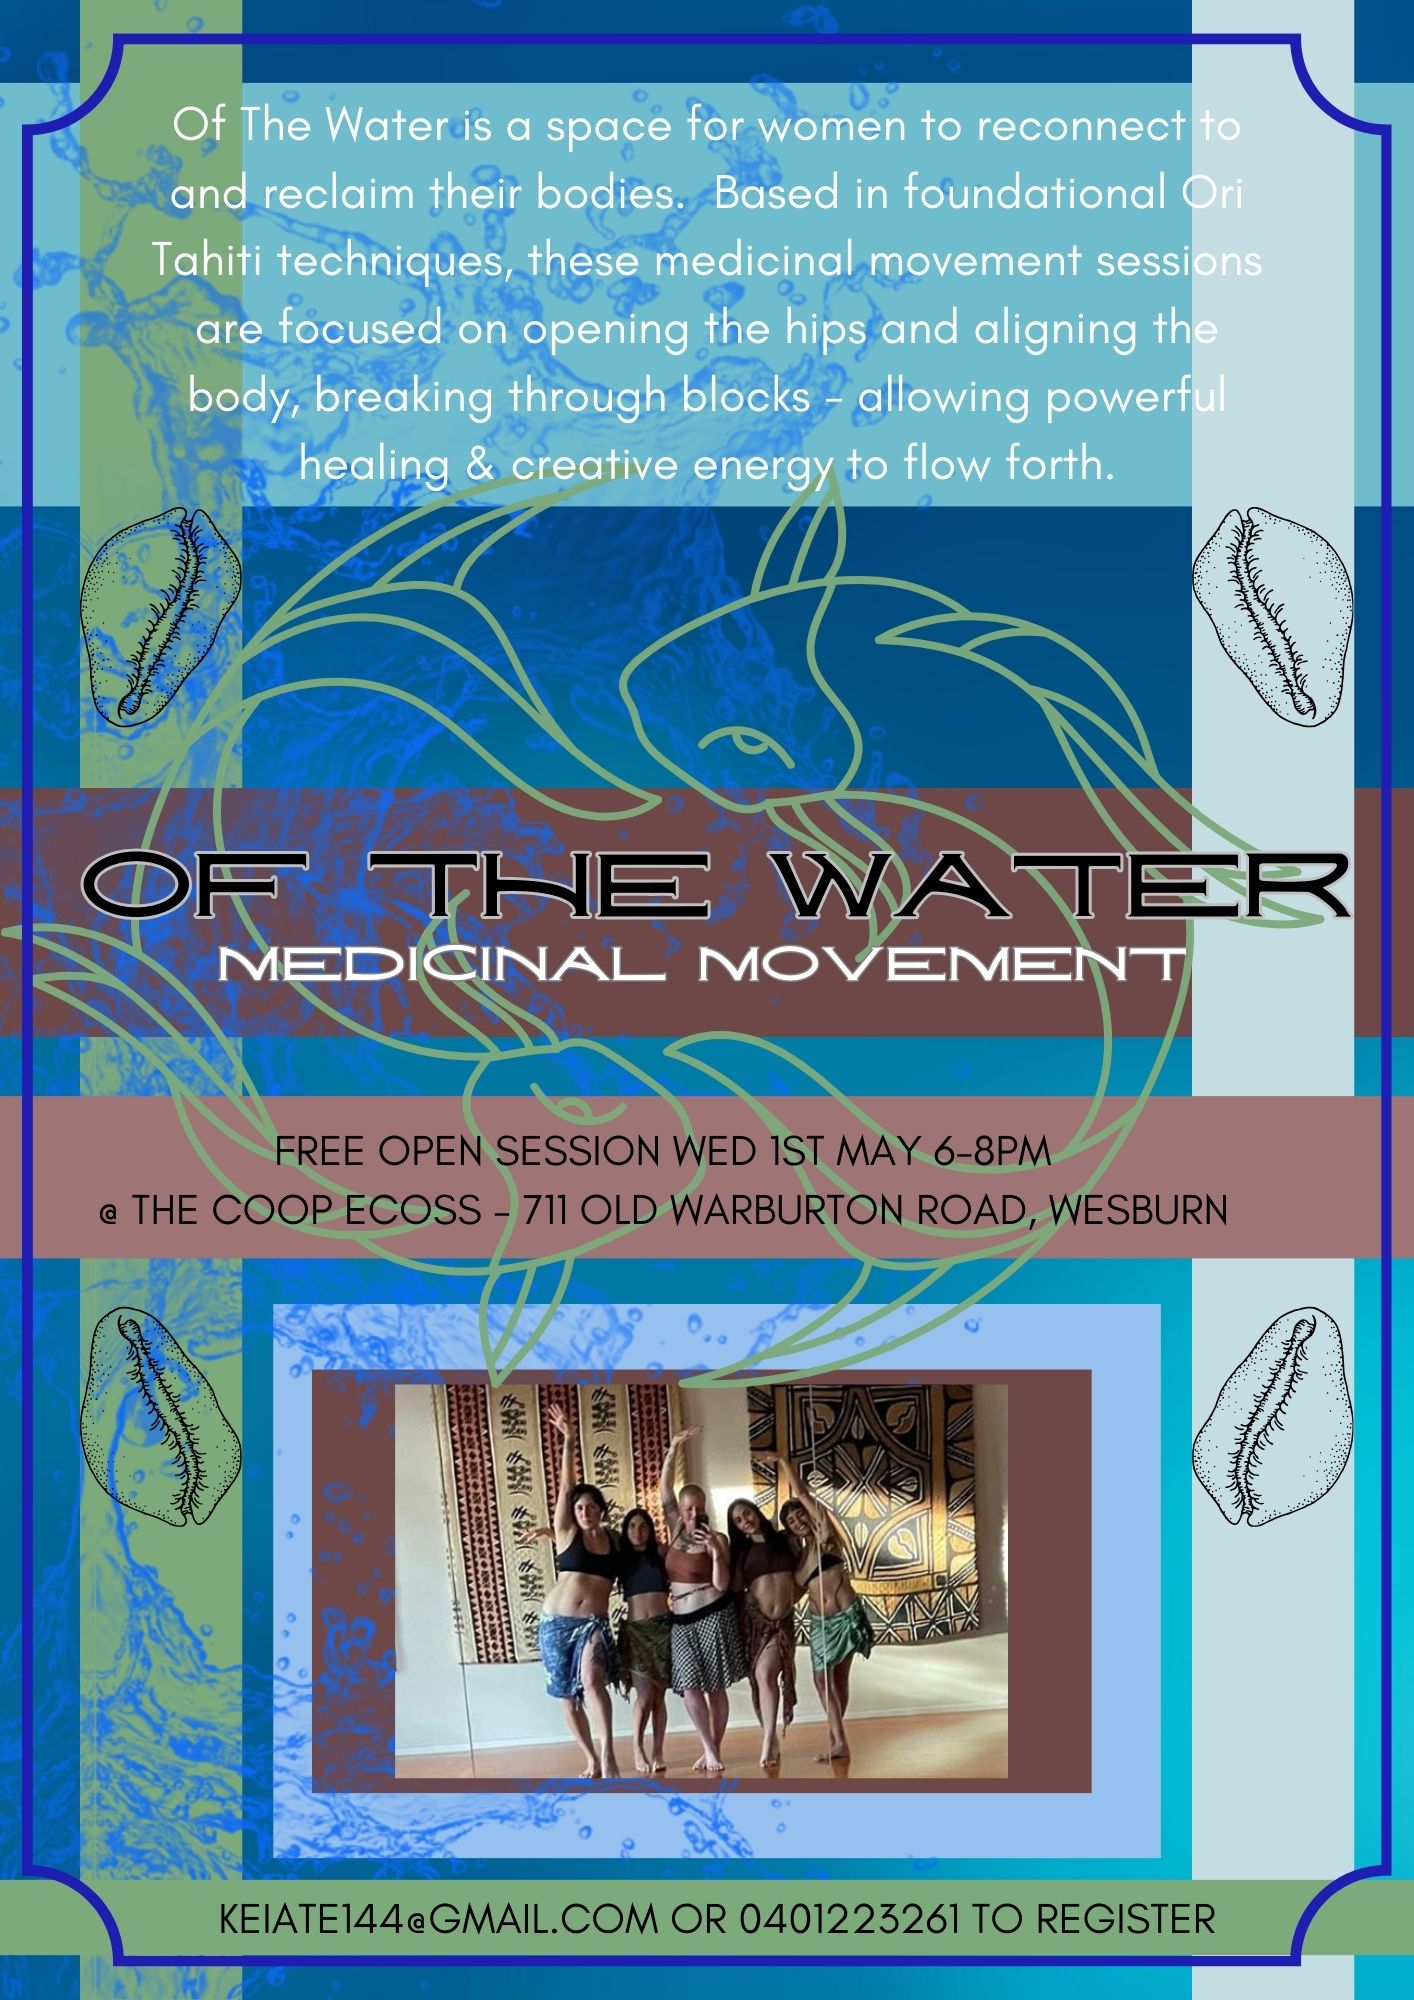 Of The Water Medicine Movement Session